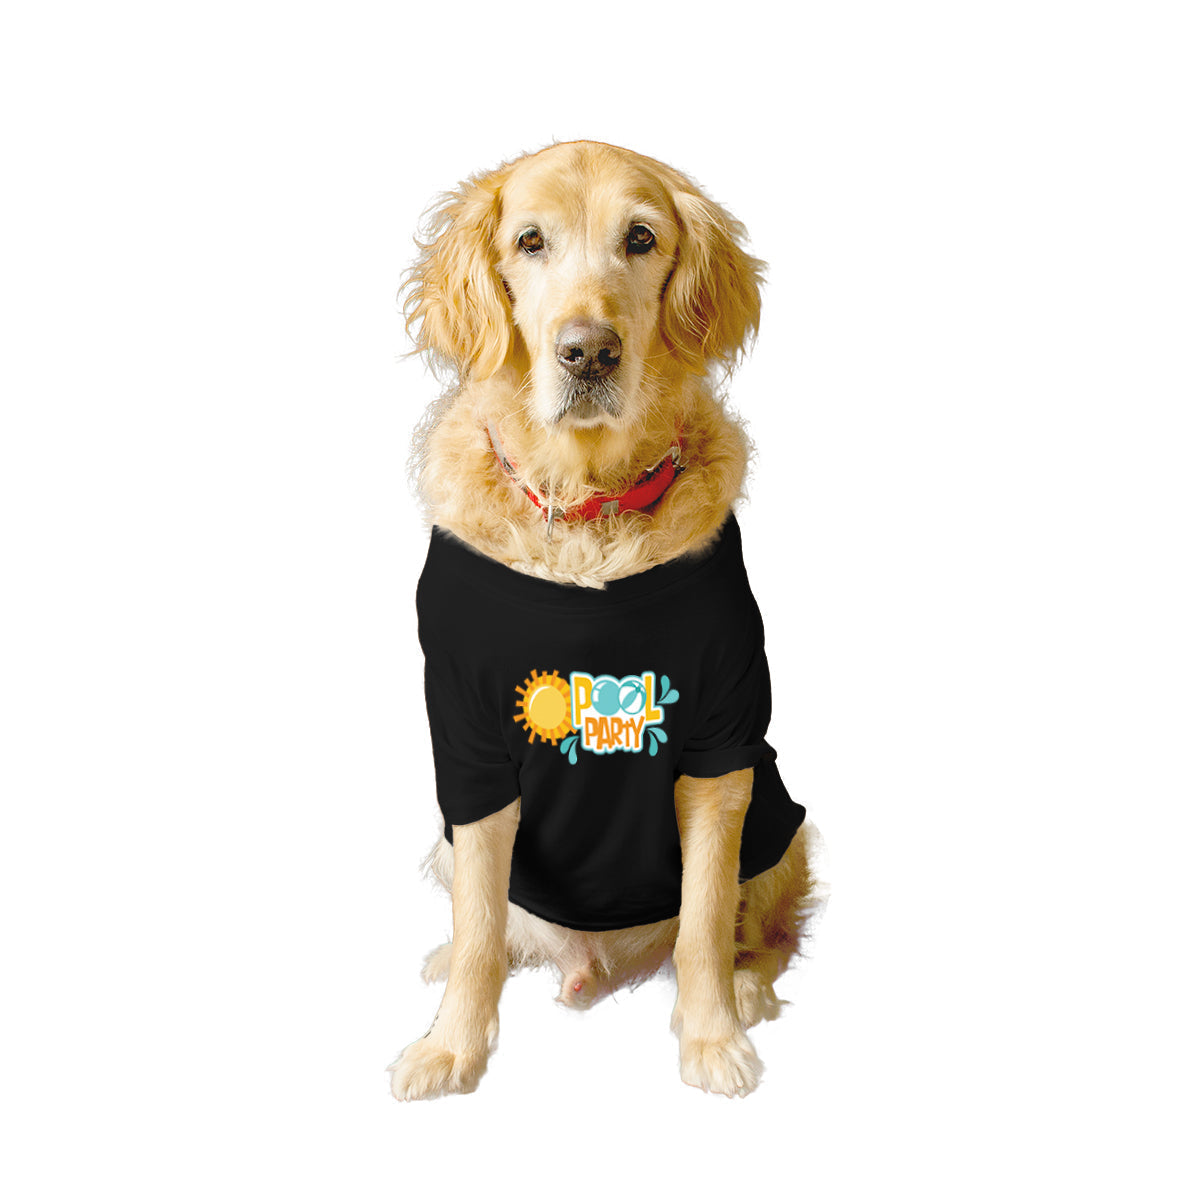 Ruse XX-Small (Chihuahuas, Papillons) / Black Ruse Basic Crew Neck 'Pool Party' Printed Half Sleeves Dog Tee7